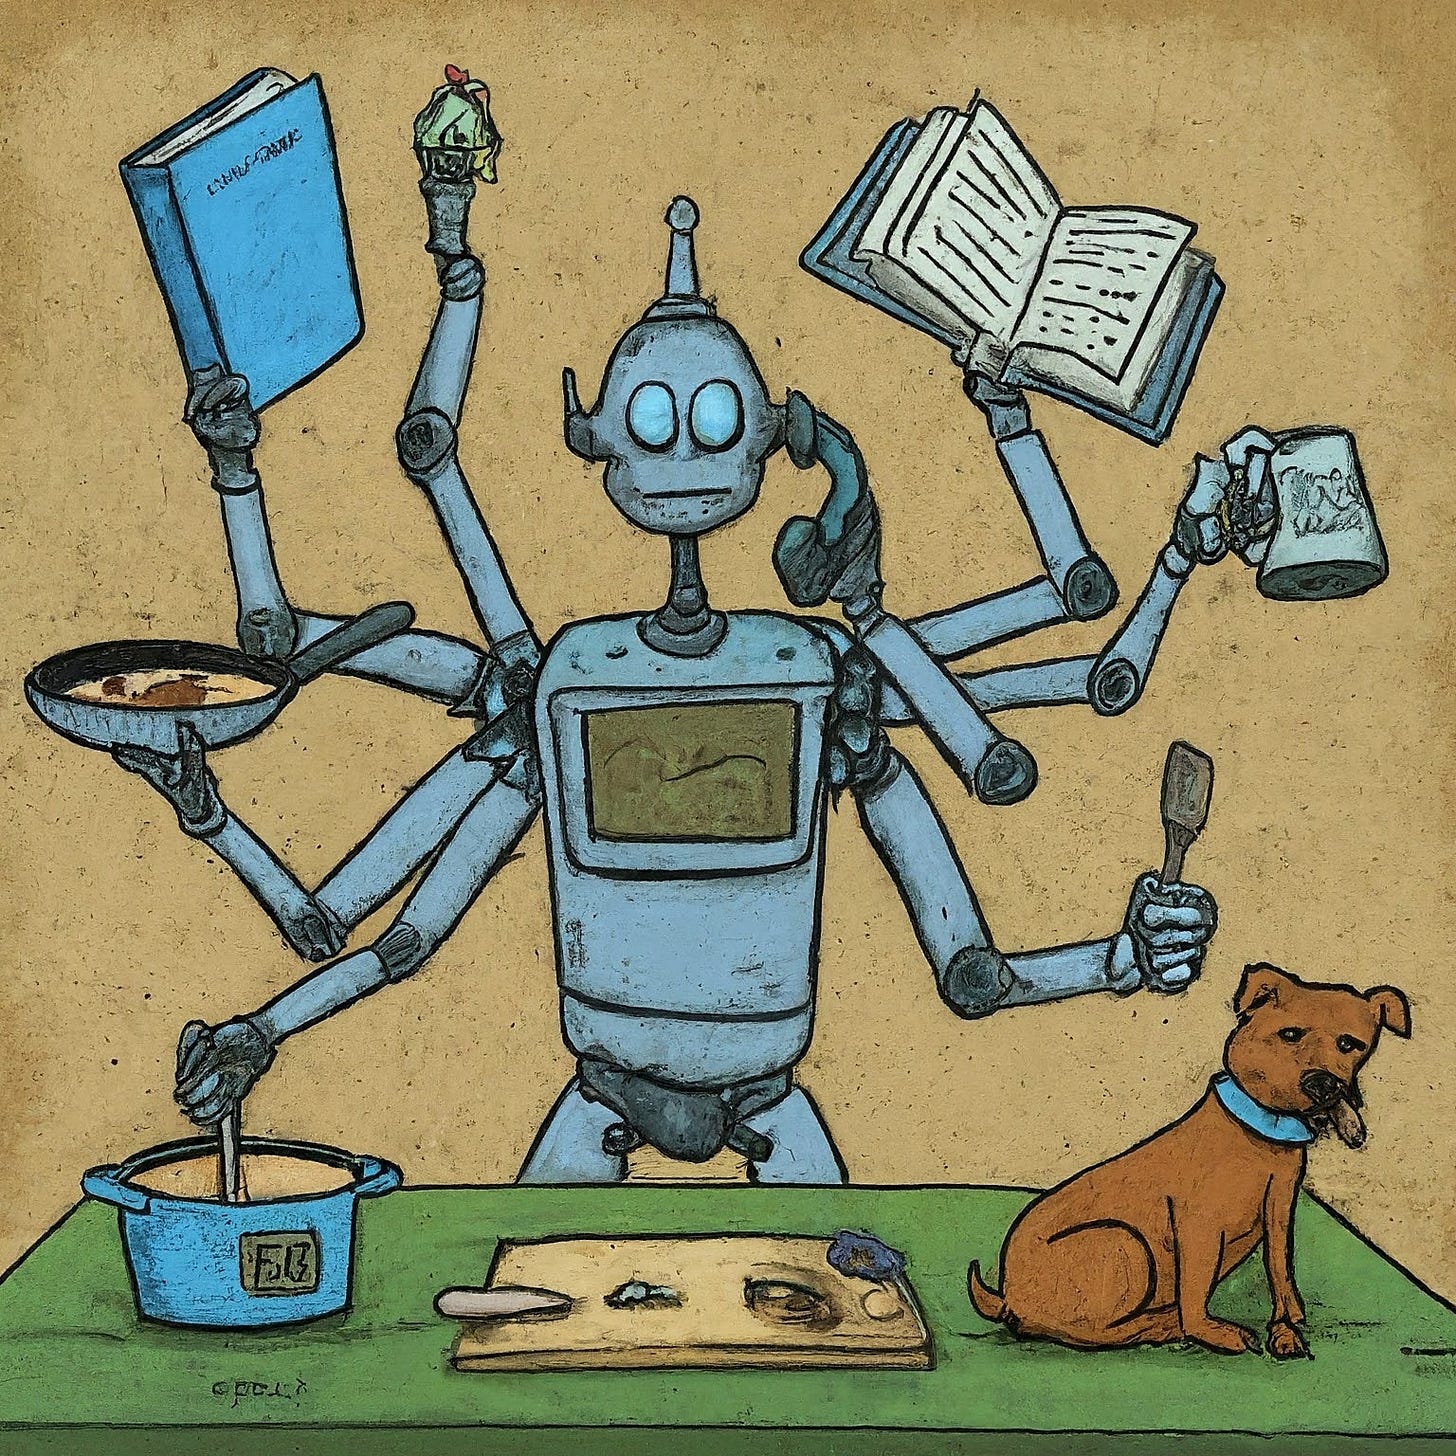 a cartoonish image of a robot multitasking between cooking, studying, reading, answering the phone, and taking care of pets